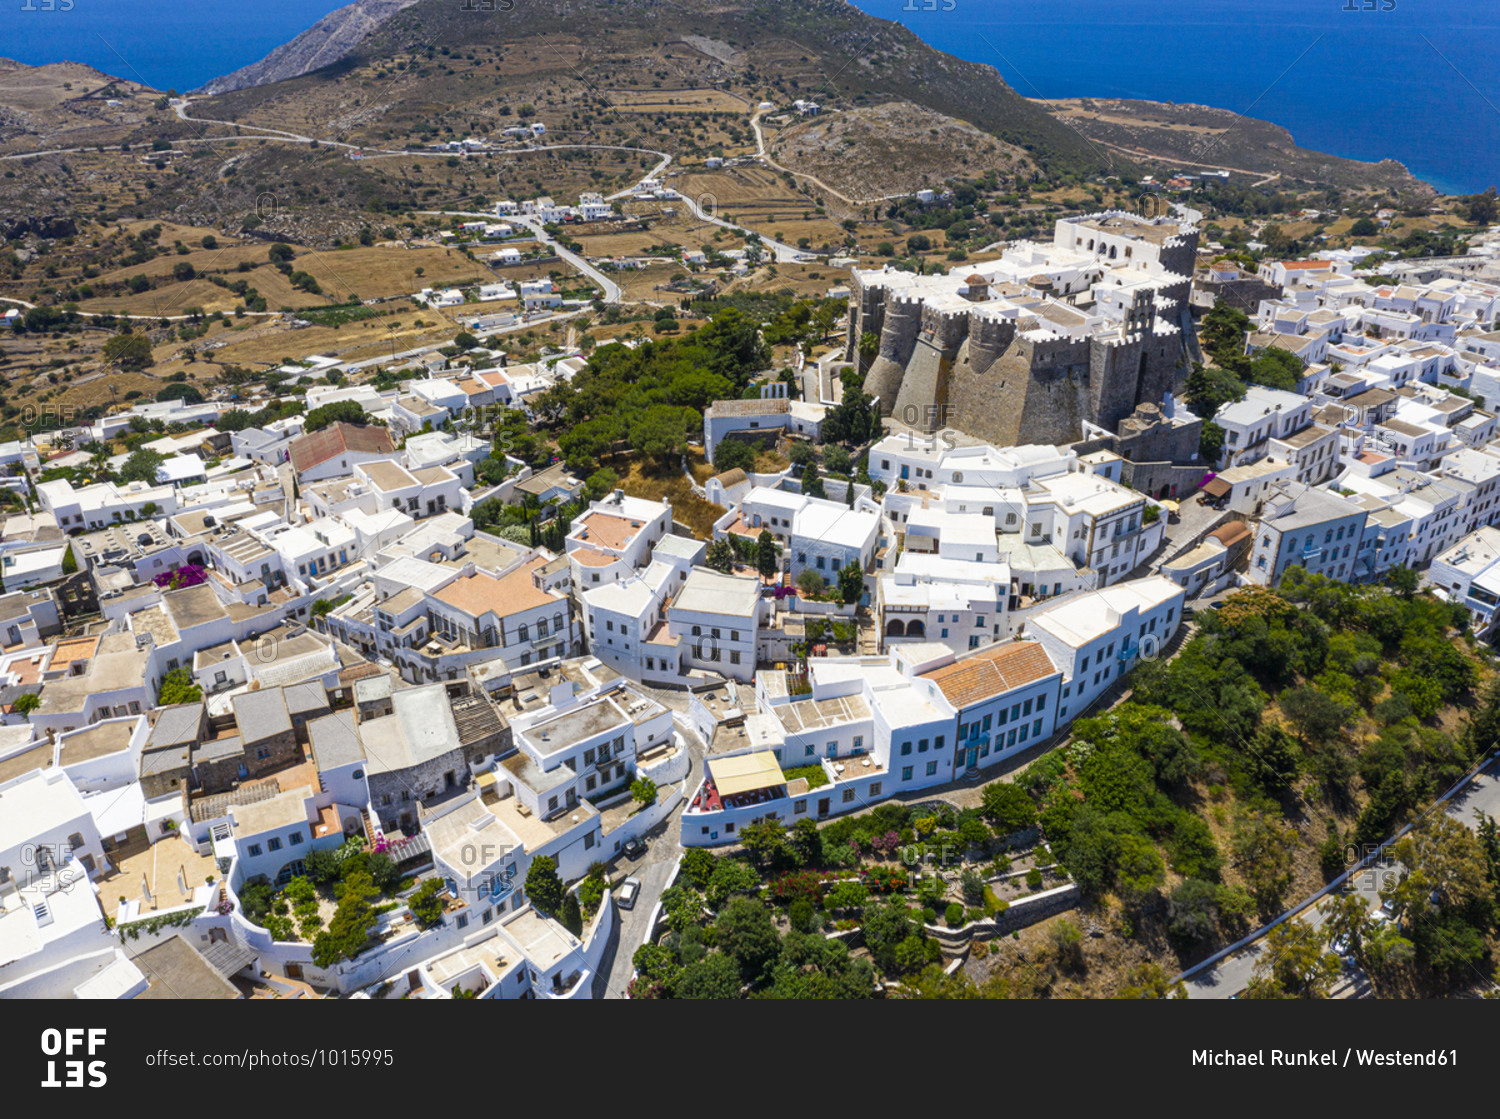 Greece- South Aegean- Patmos- Aerial view of Monastery of Saint John the Theologian and surrounding town